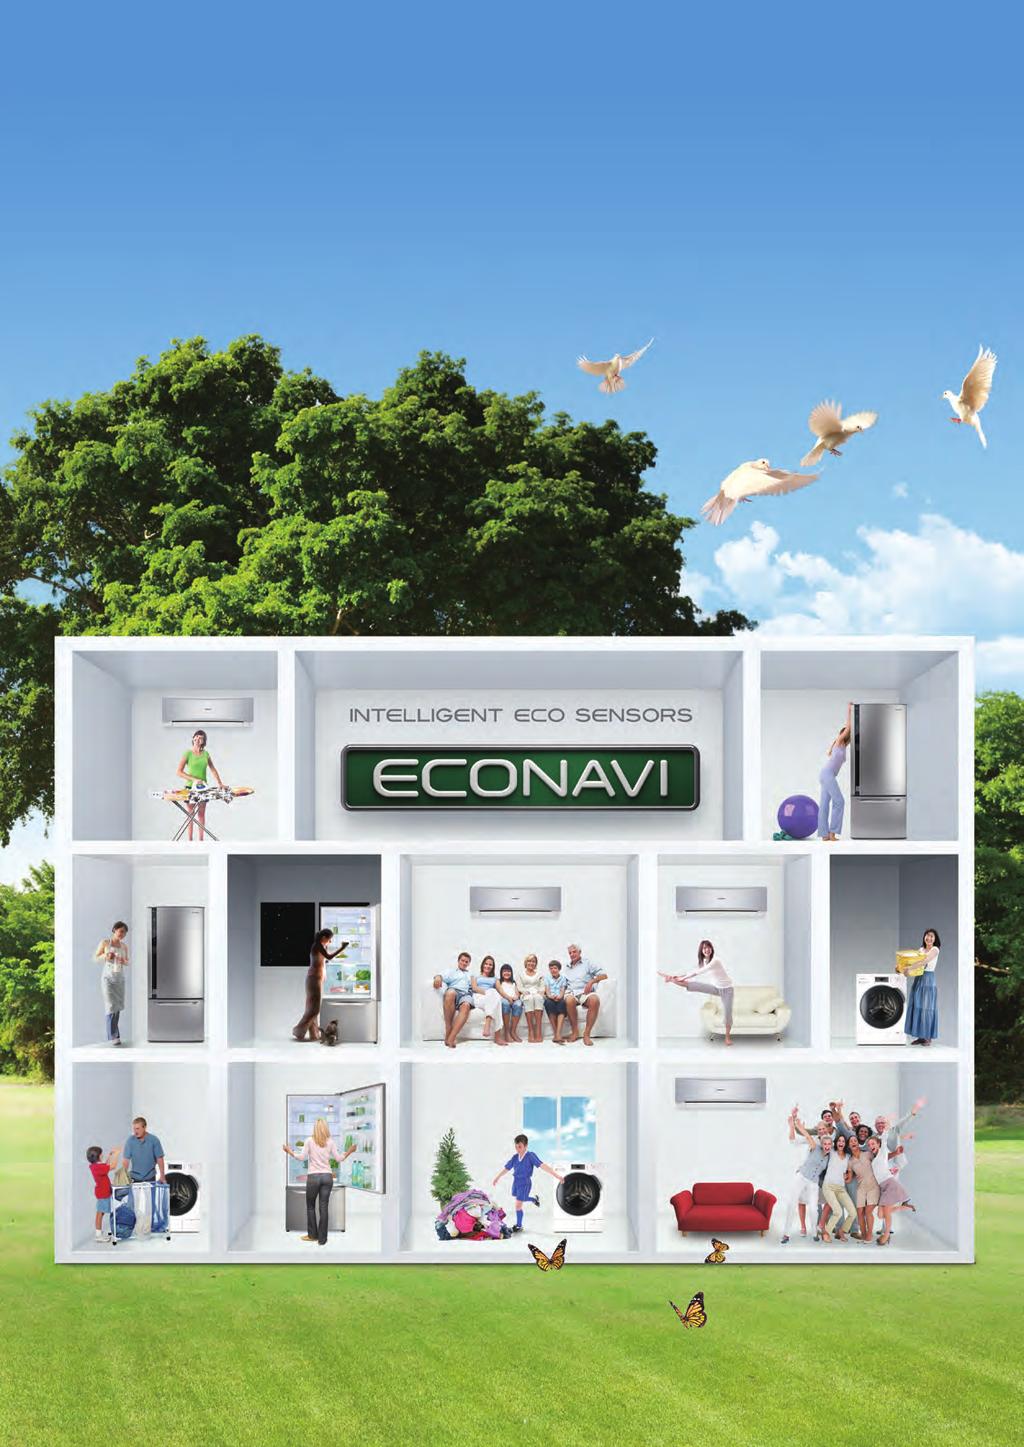 INTELLIGENT ECO SENSORS Clever ECO sensor technology adapts to your life With Panasonic s new ECONAVI, living an eco-friendly life has never been easier.